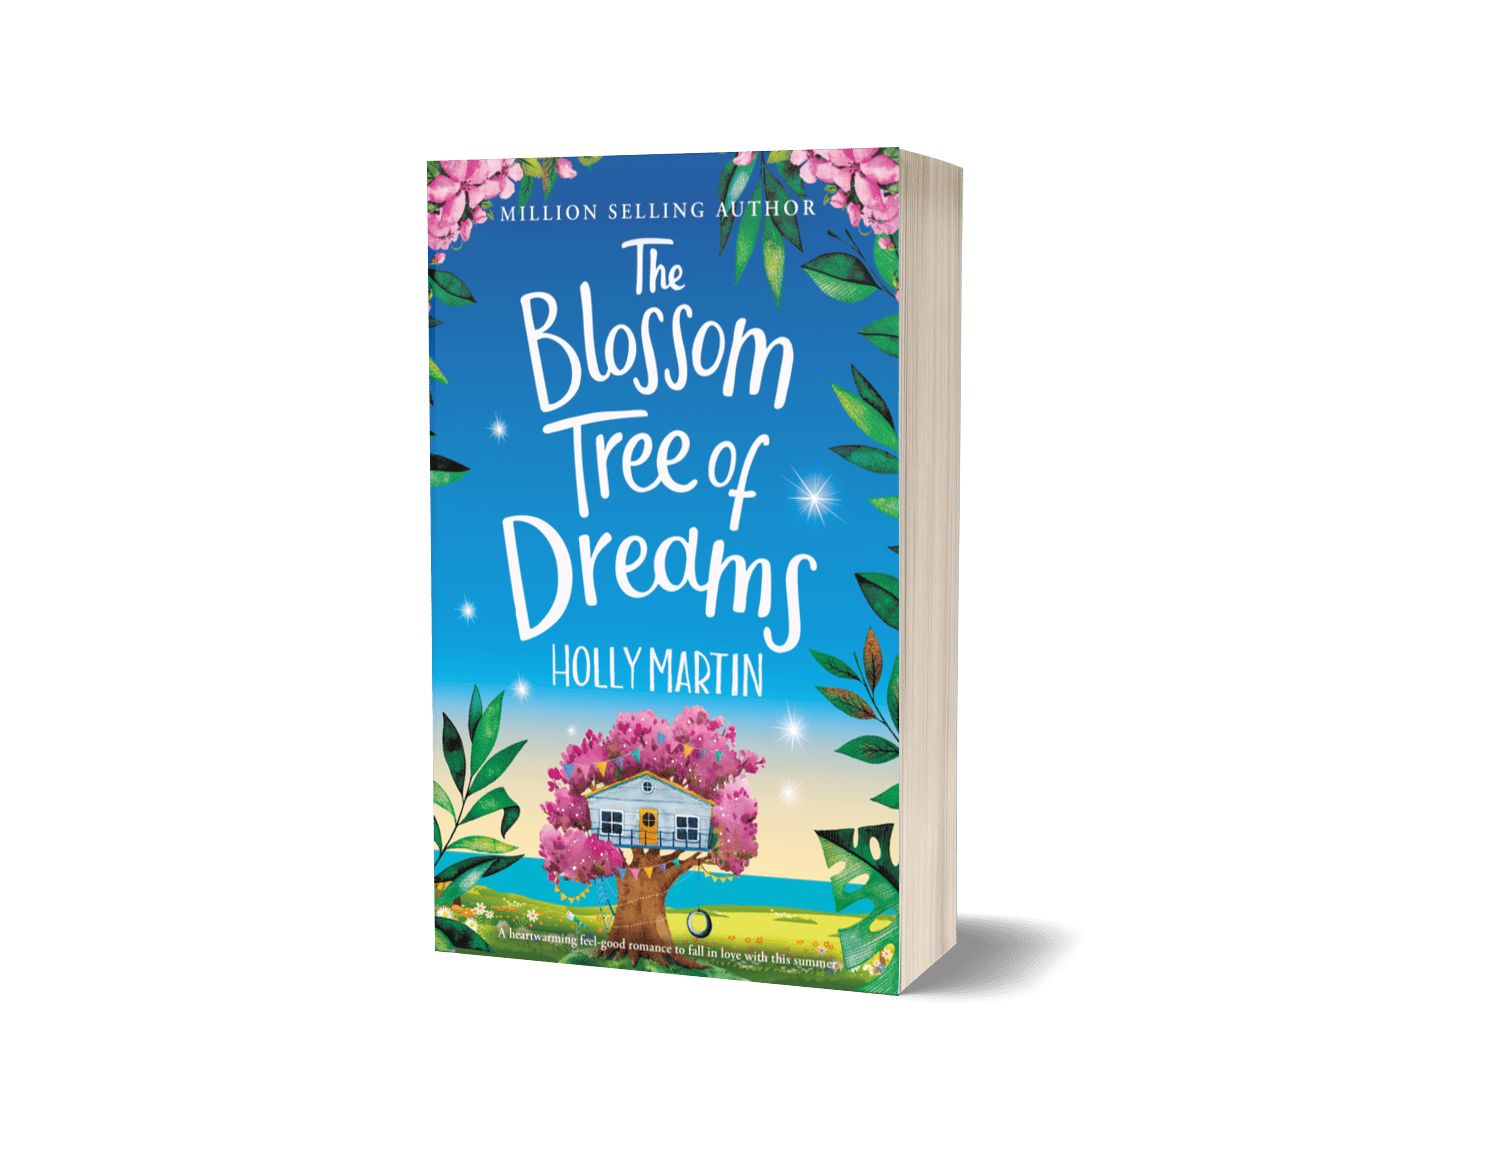 Image of Signed copy of The Blossom Tree of Dreams